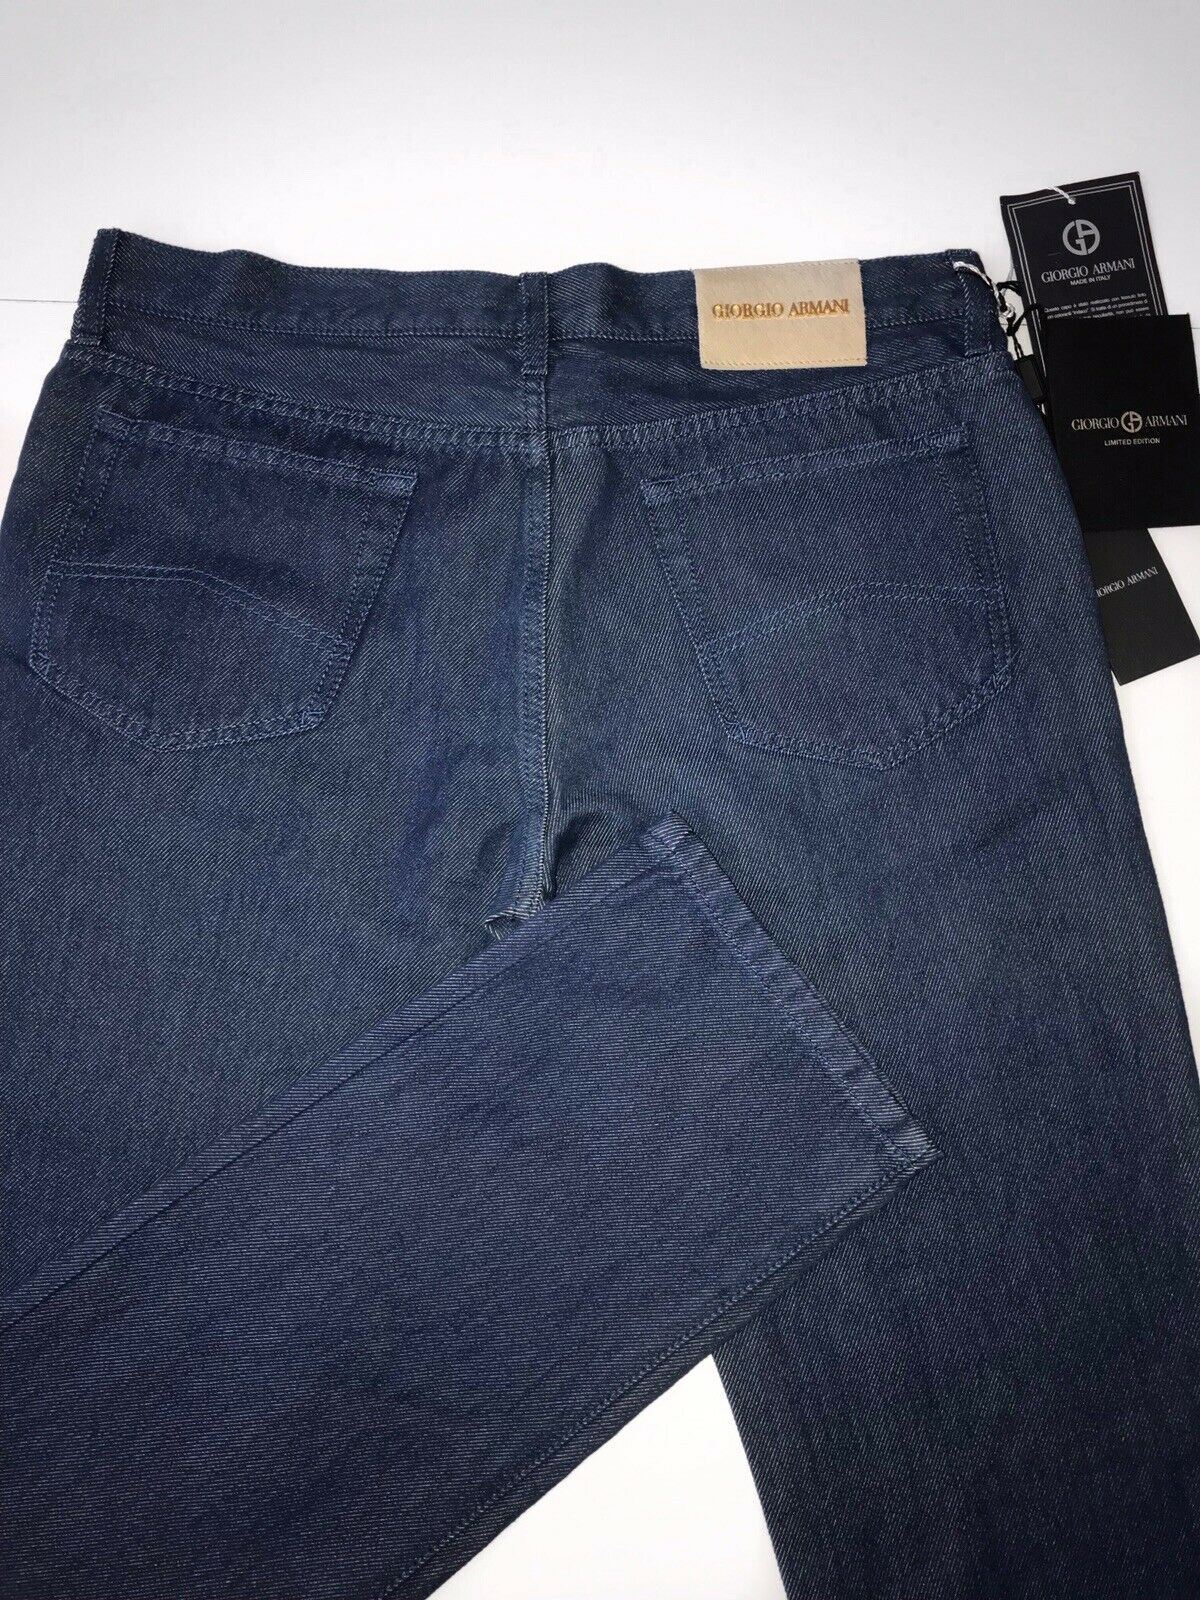 armani jeans limited edition